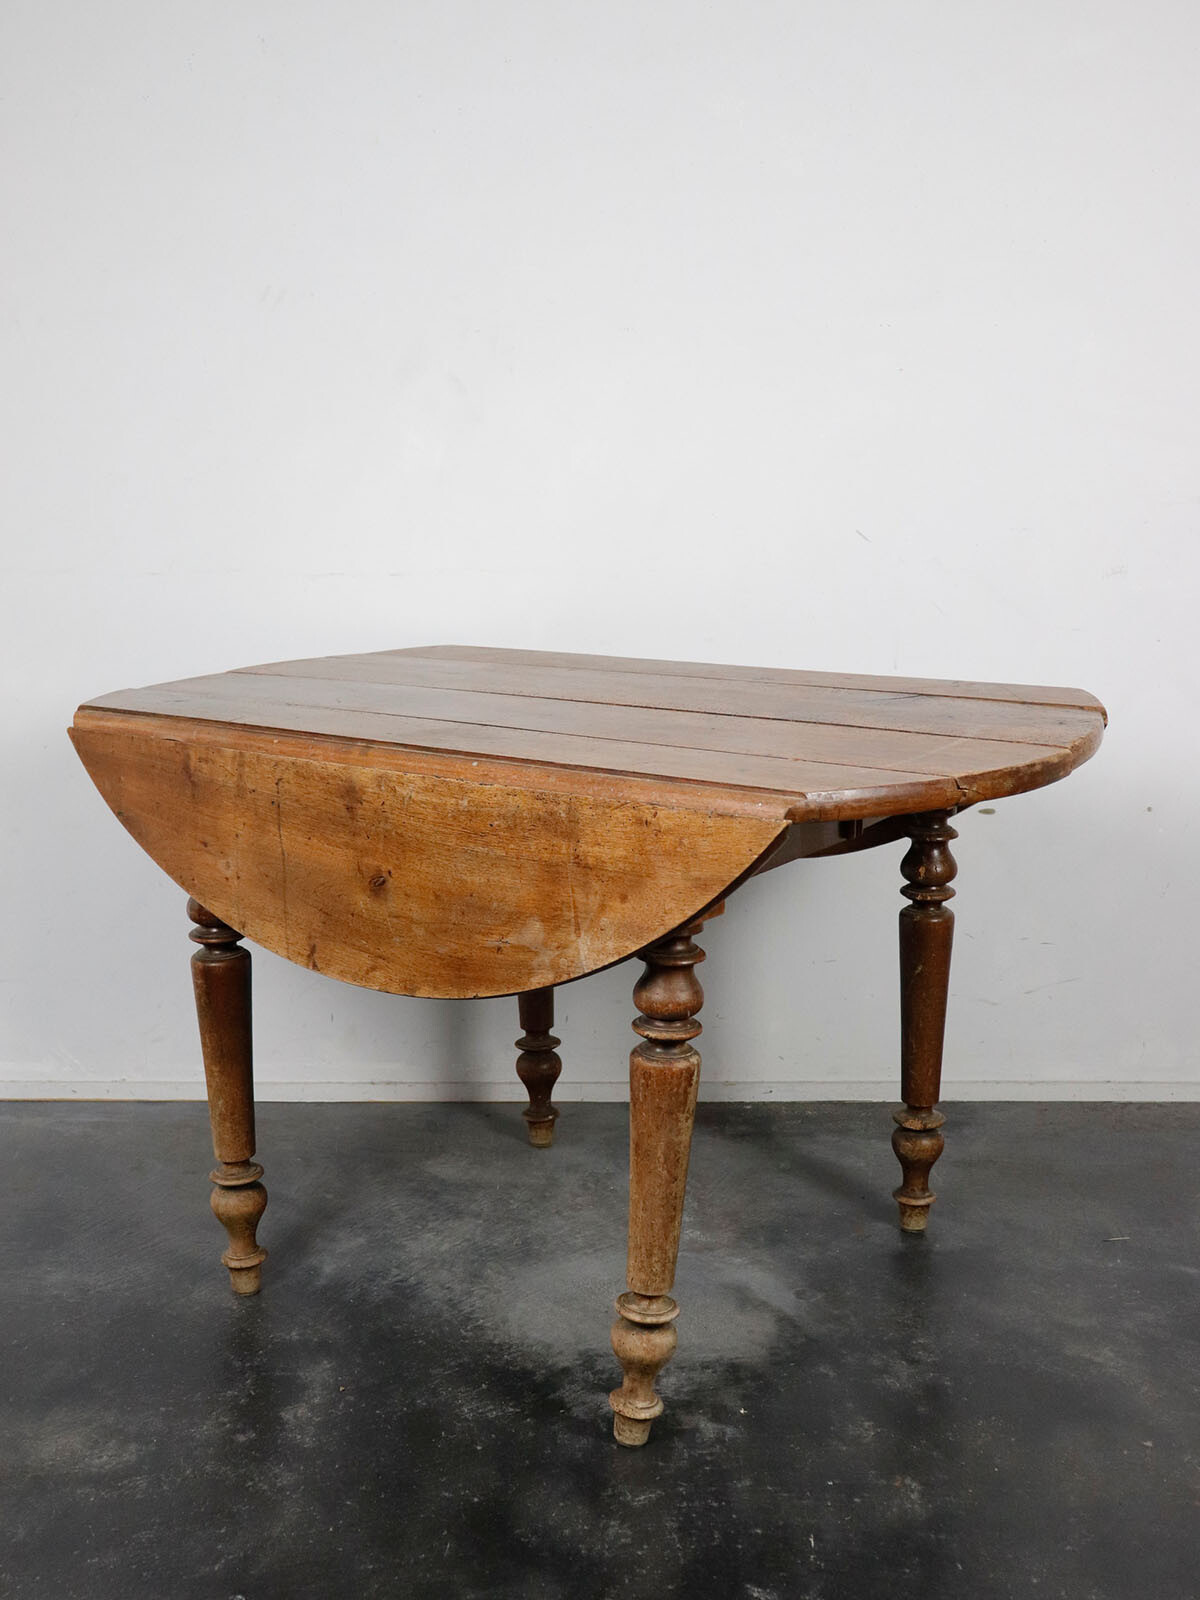 19c,folding wood table,round table,France,antique